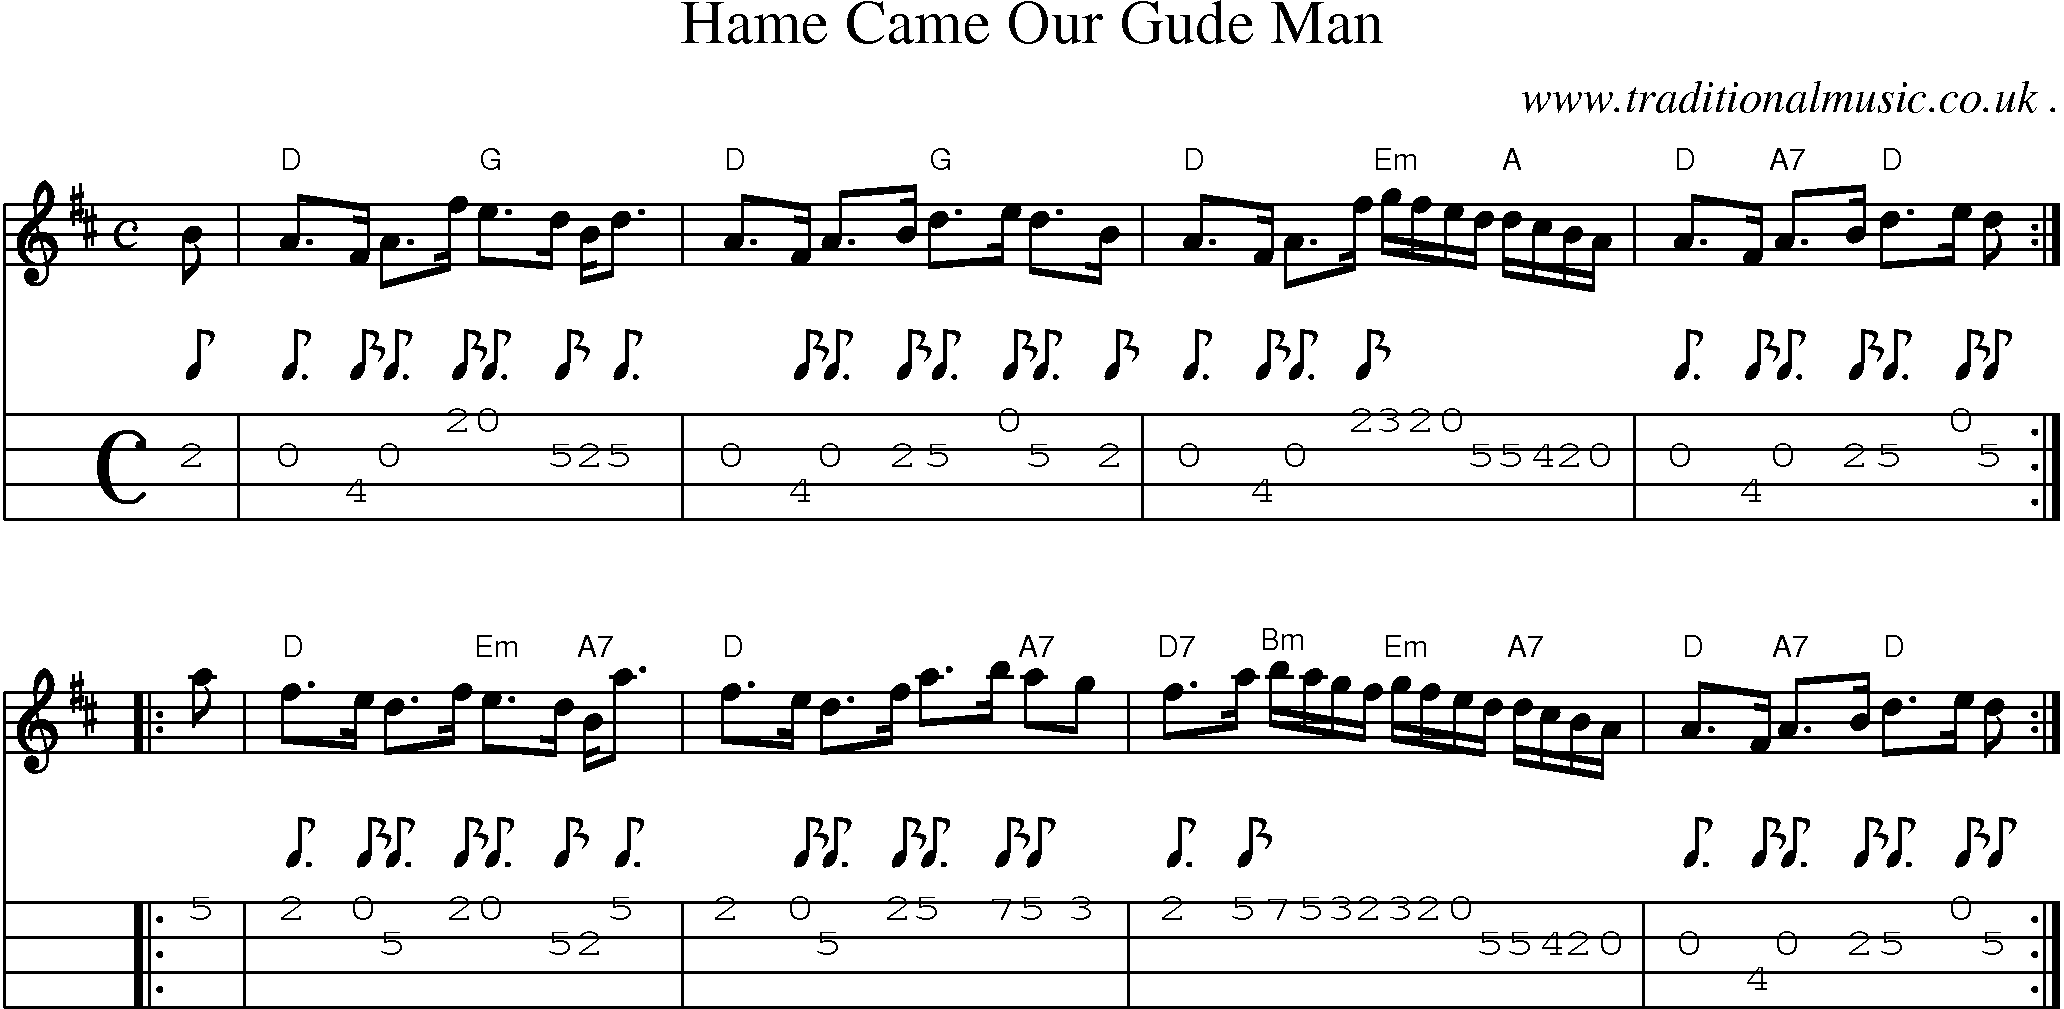 Sheet-music  score, Chords and Mandolin Tabs for Hame Came Our Gude Man